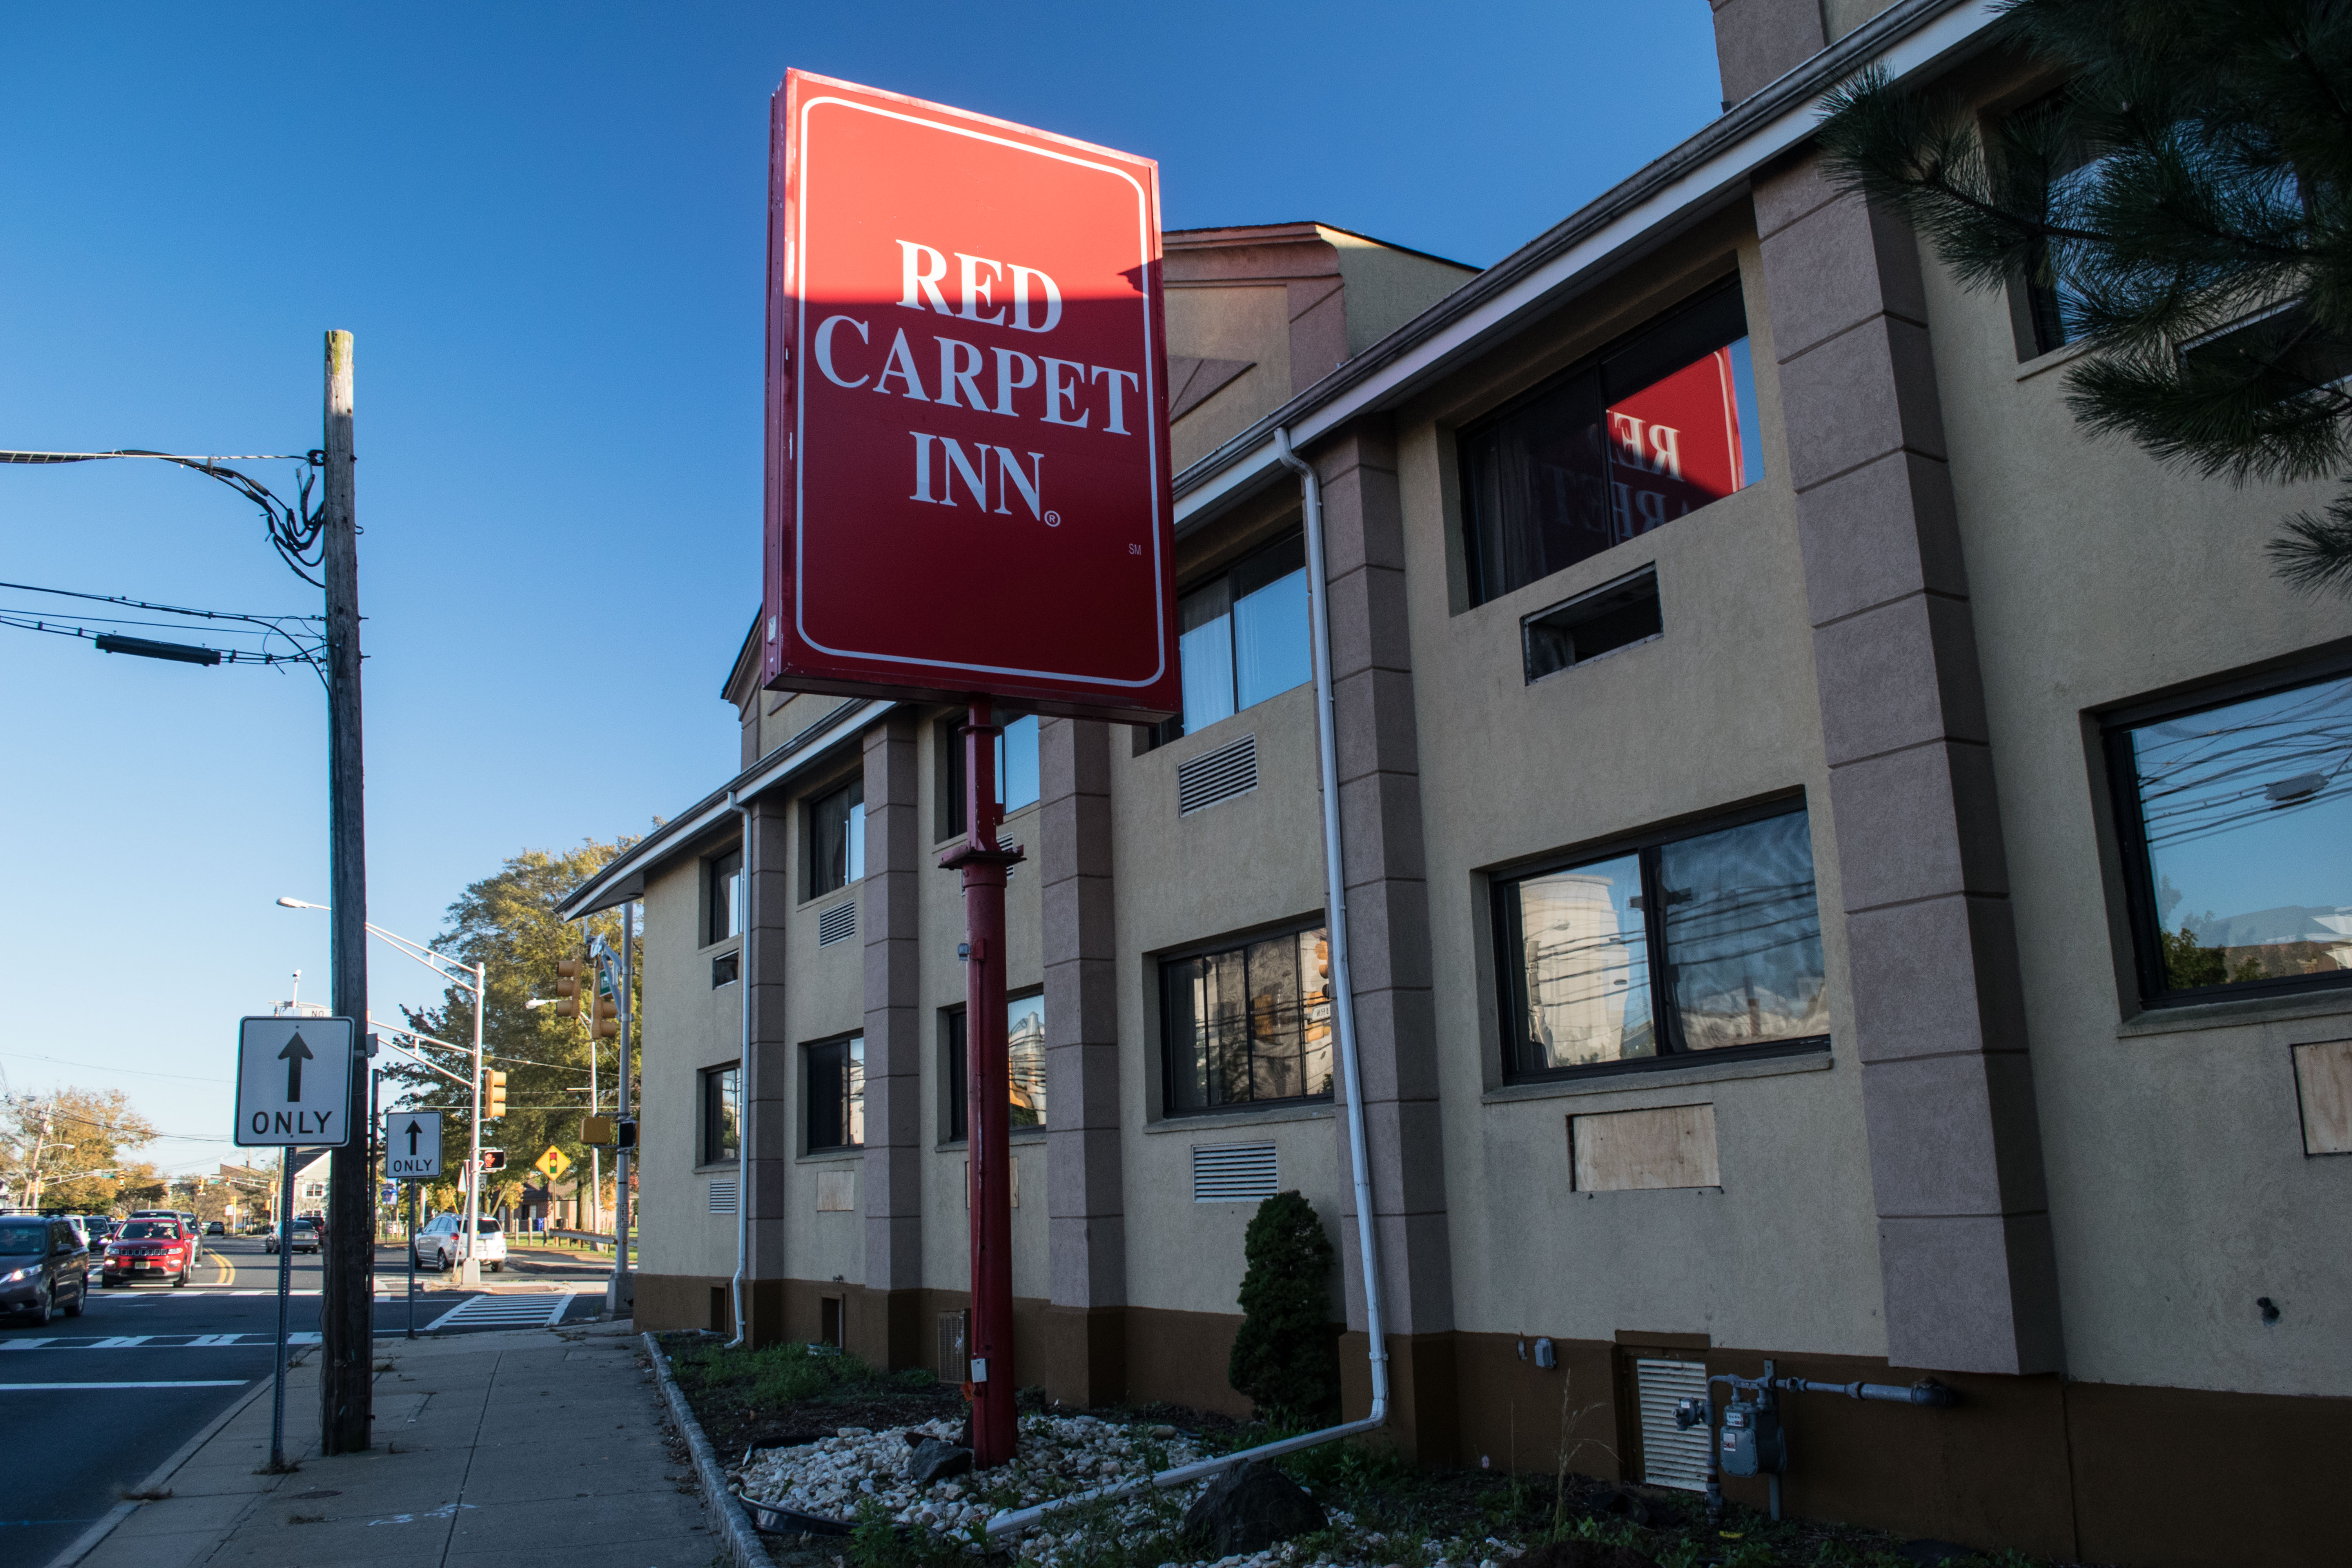 The Red Carpet Inn, boarded up, the day it was purchased by Toms River Township, Oct. 30, 2018. (Photo: Daniel Nee)